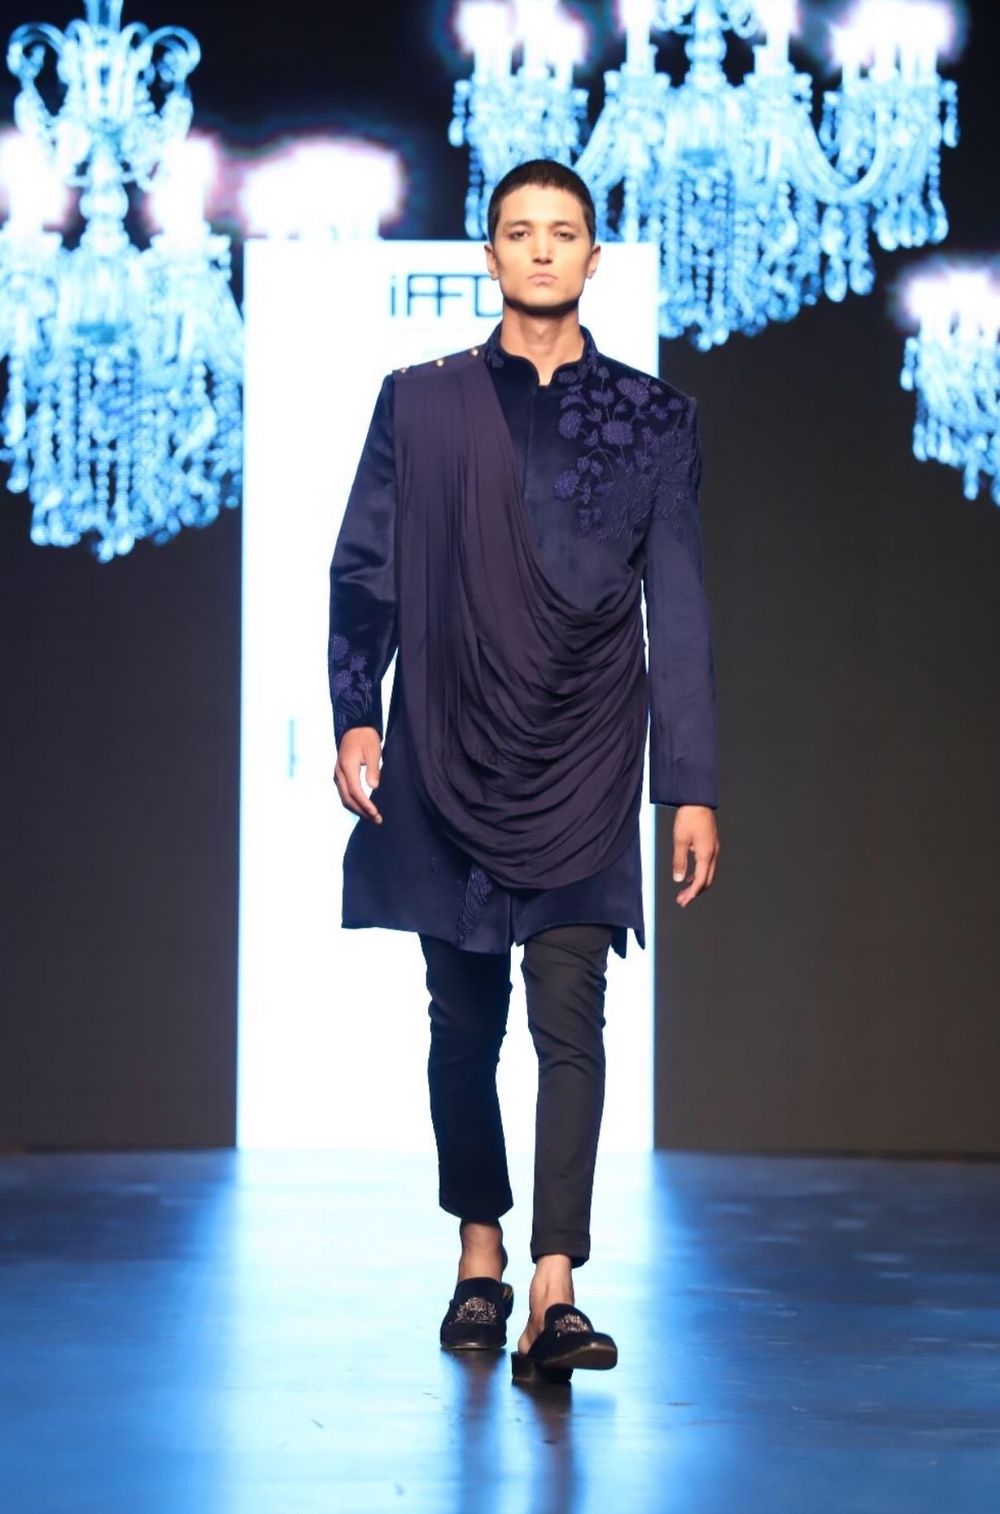 Photo From Runway Collection  - By Yajy Design Lounge